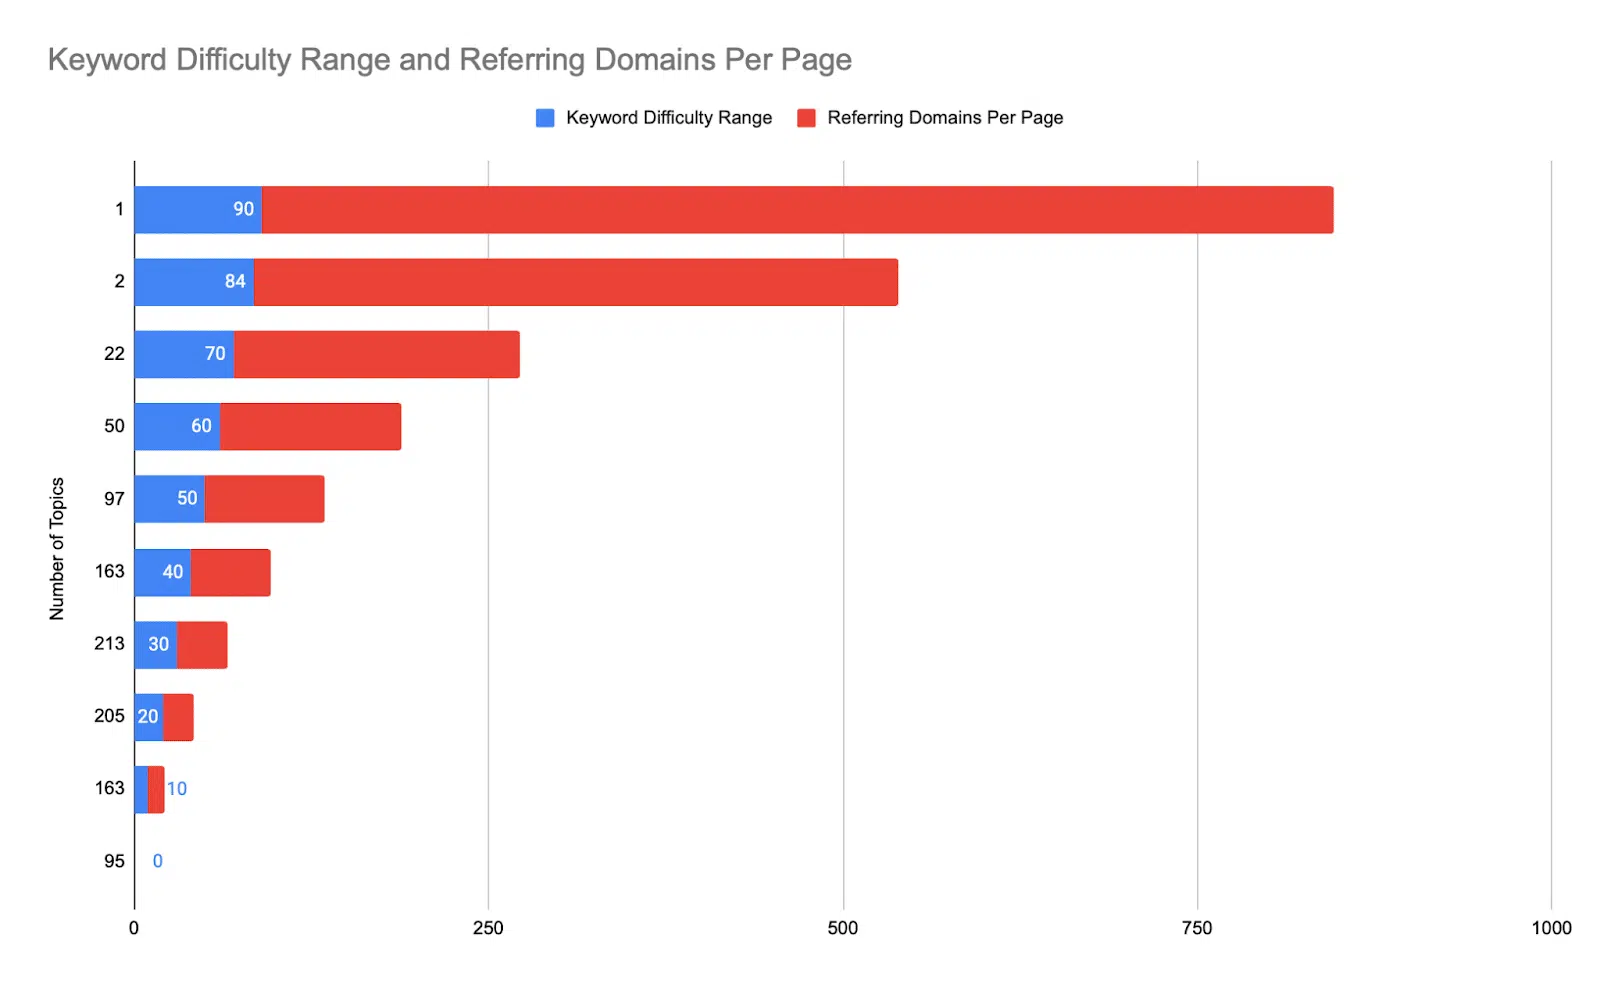 Keyword difficulty range and referring domains per page